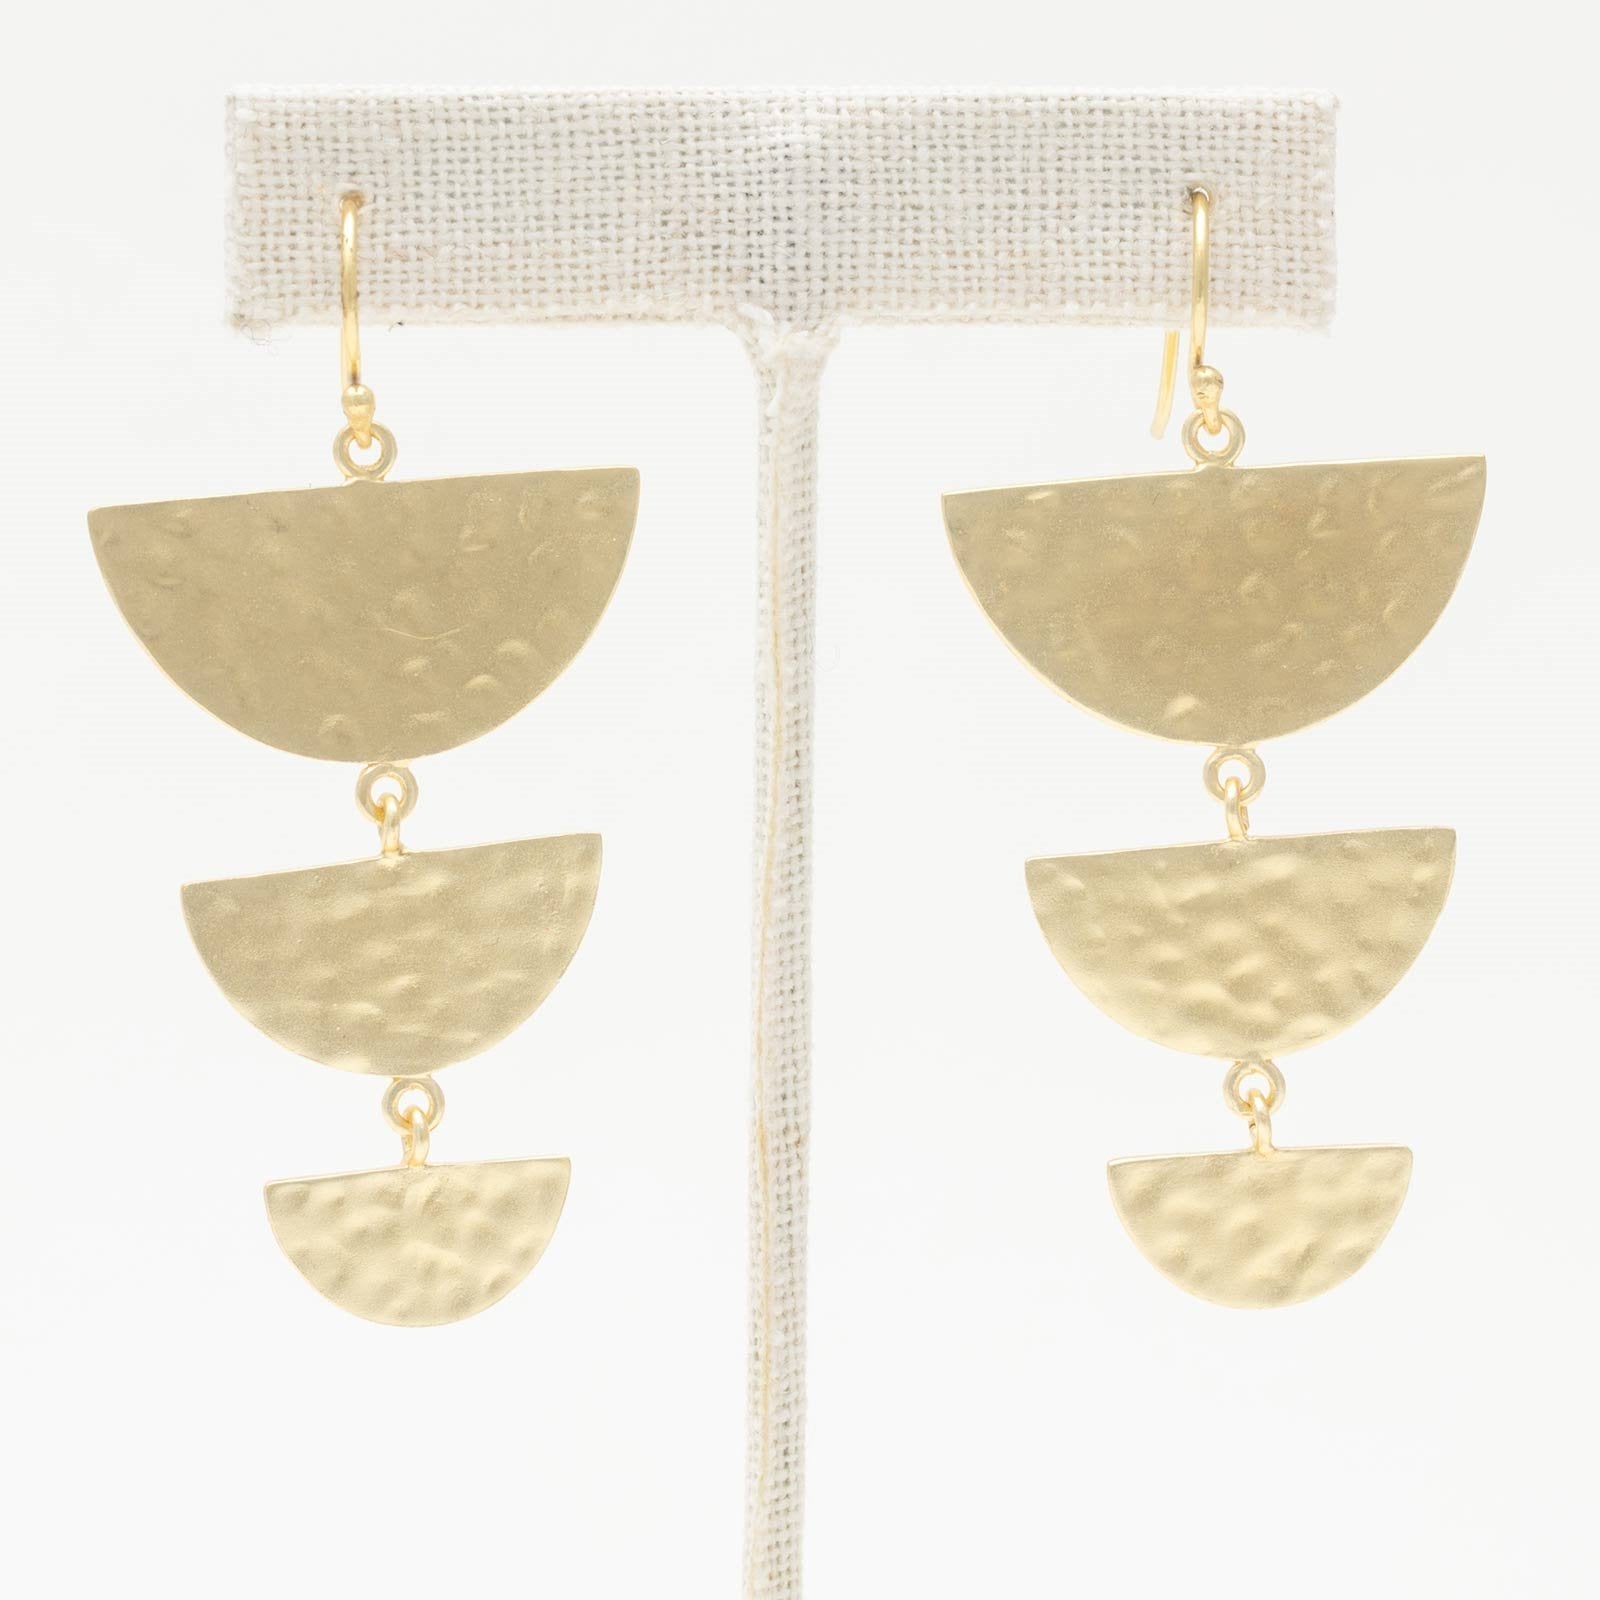 Stacked 3 Tier Semi-Circle 18K Gold Plated Hammered Earrings Earring - rockflowerpaper